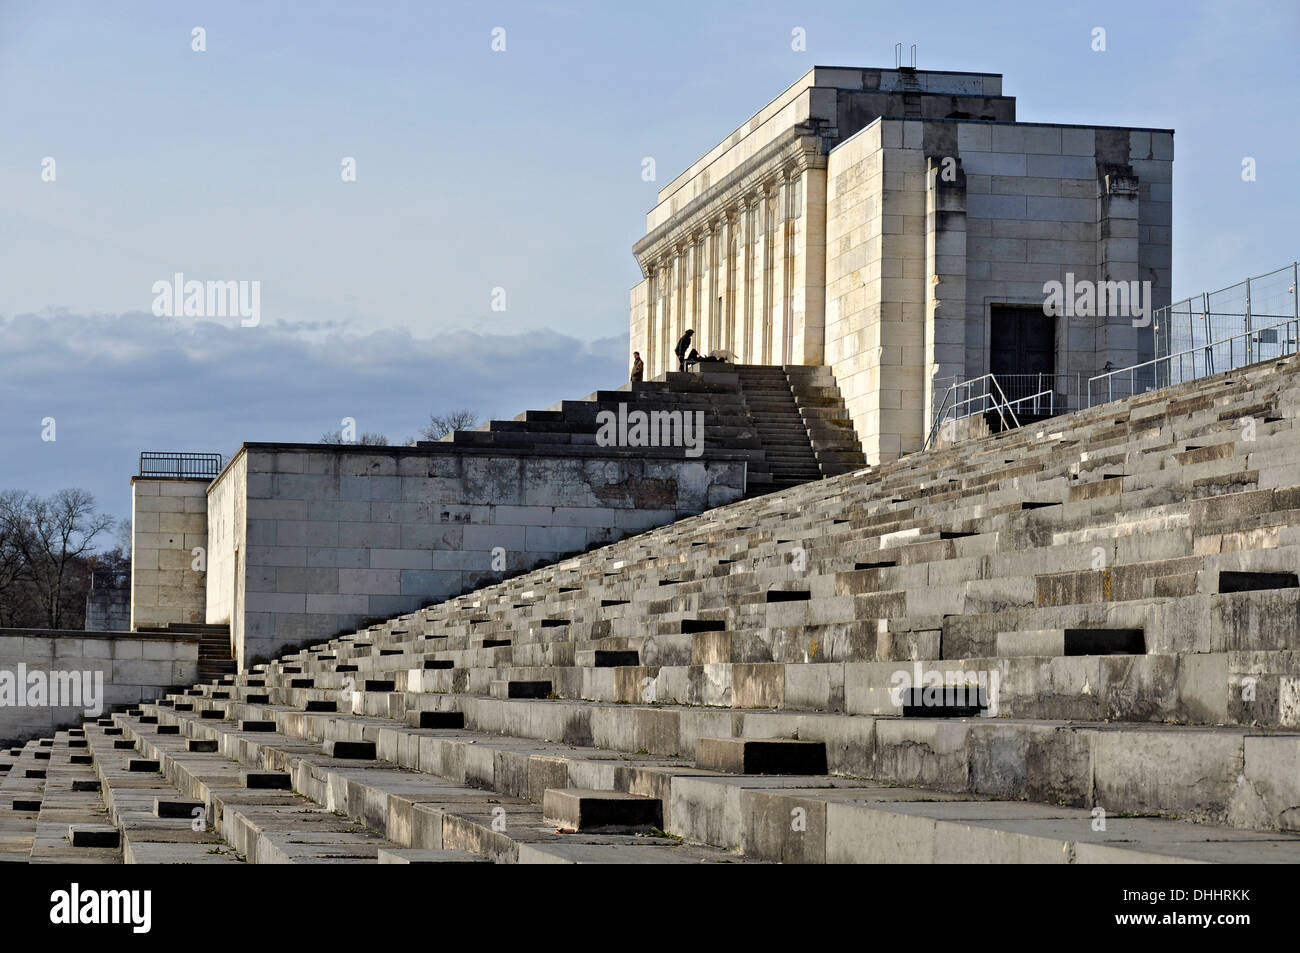 Large grandstand at Zeppelinfeld, Zeppelin Field, Nazi party rally grounds, Nuremberg, Middle Franconia, Bavaria, Germany Stock Photo